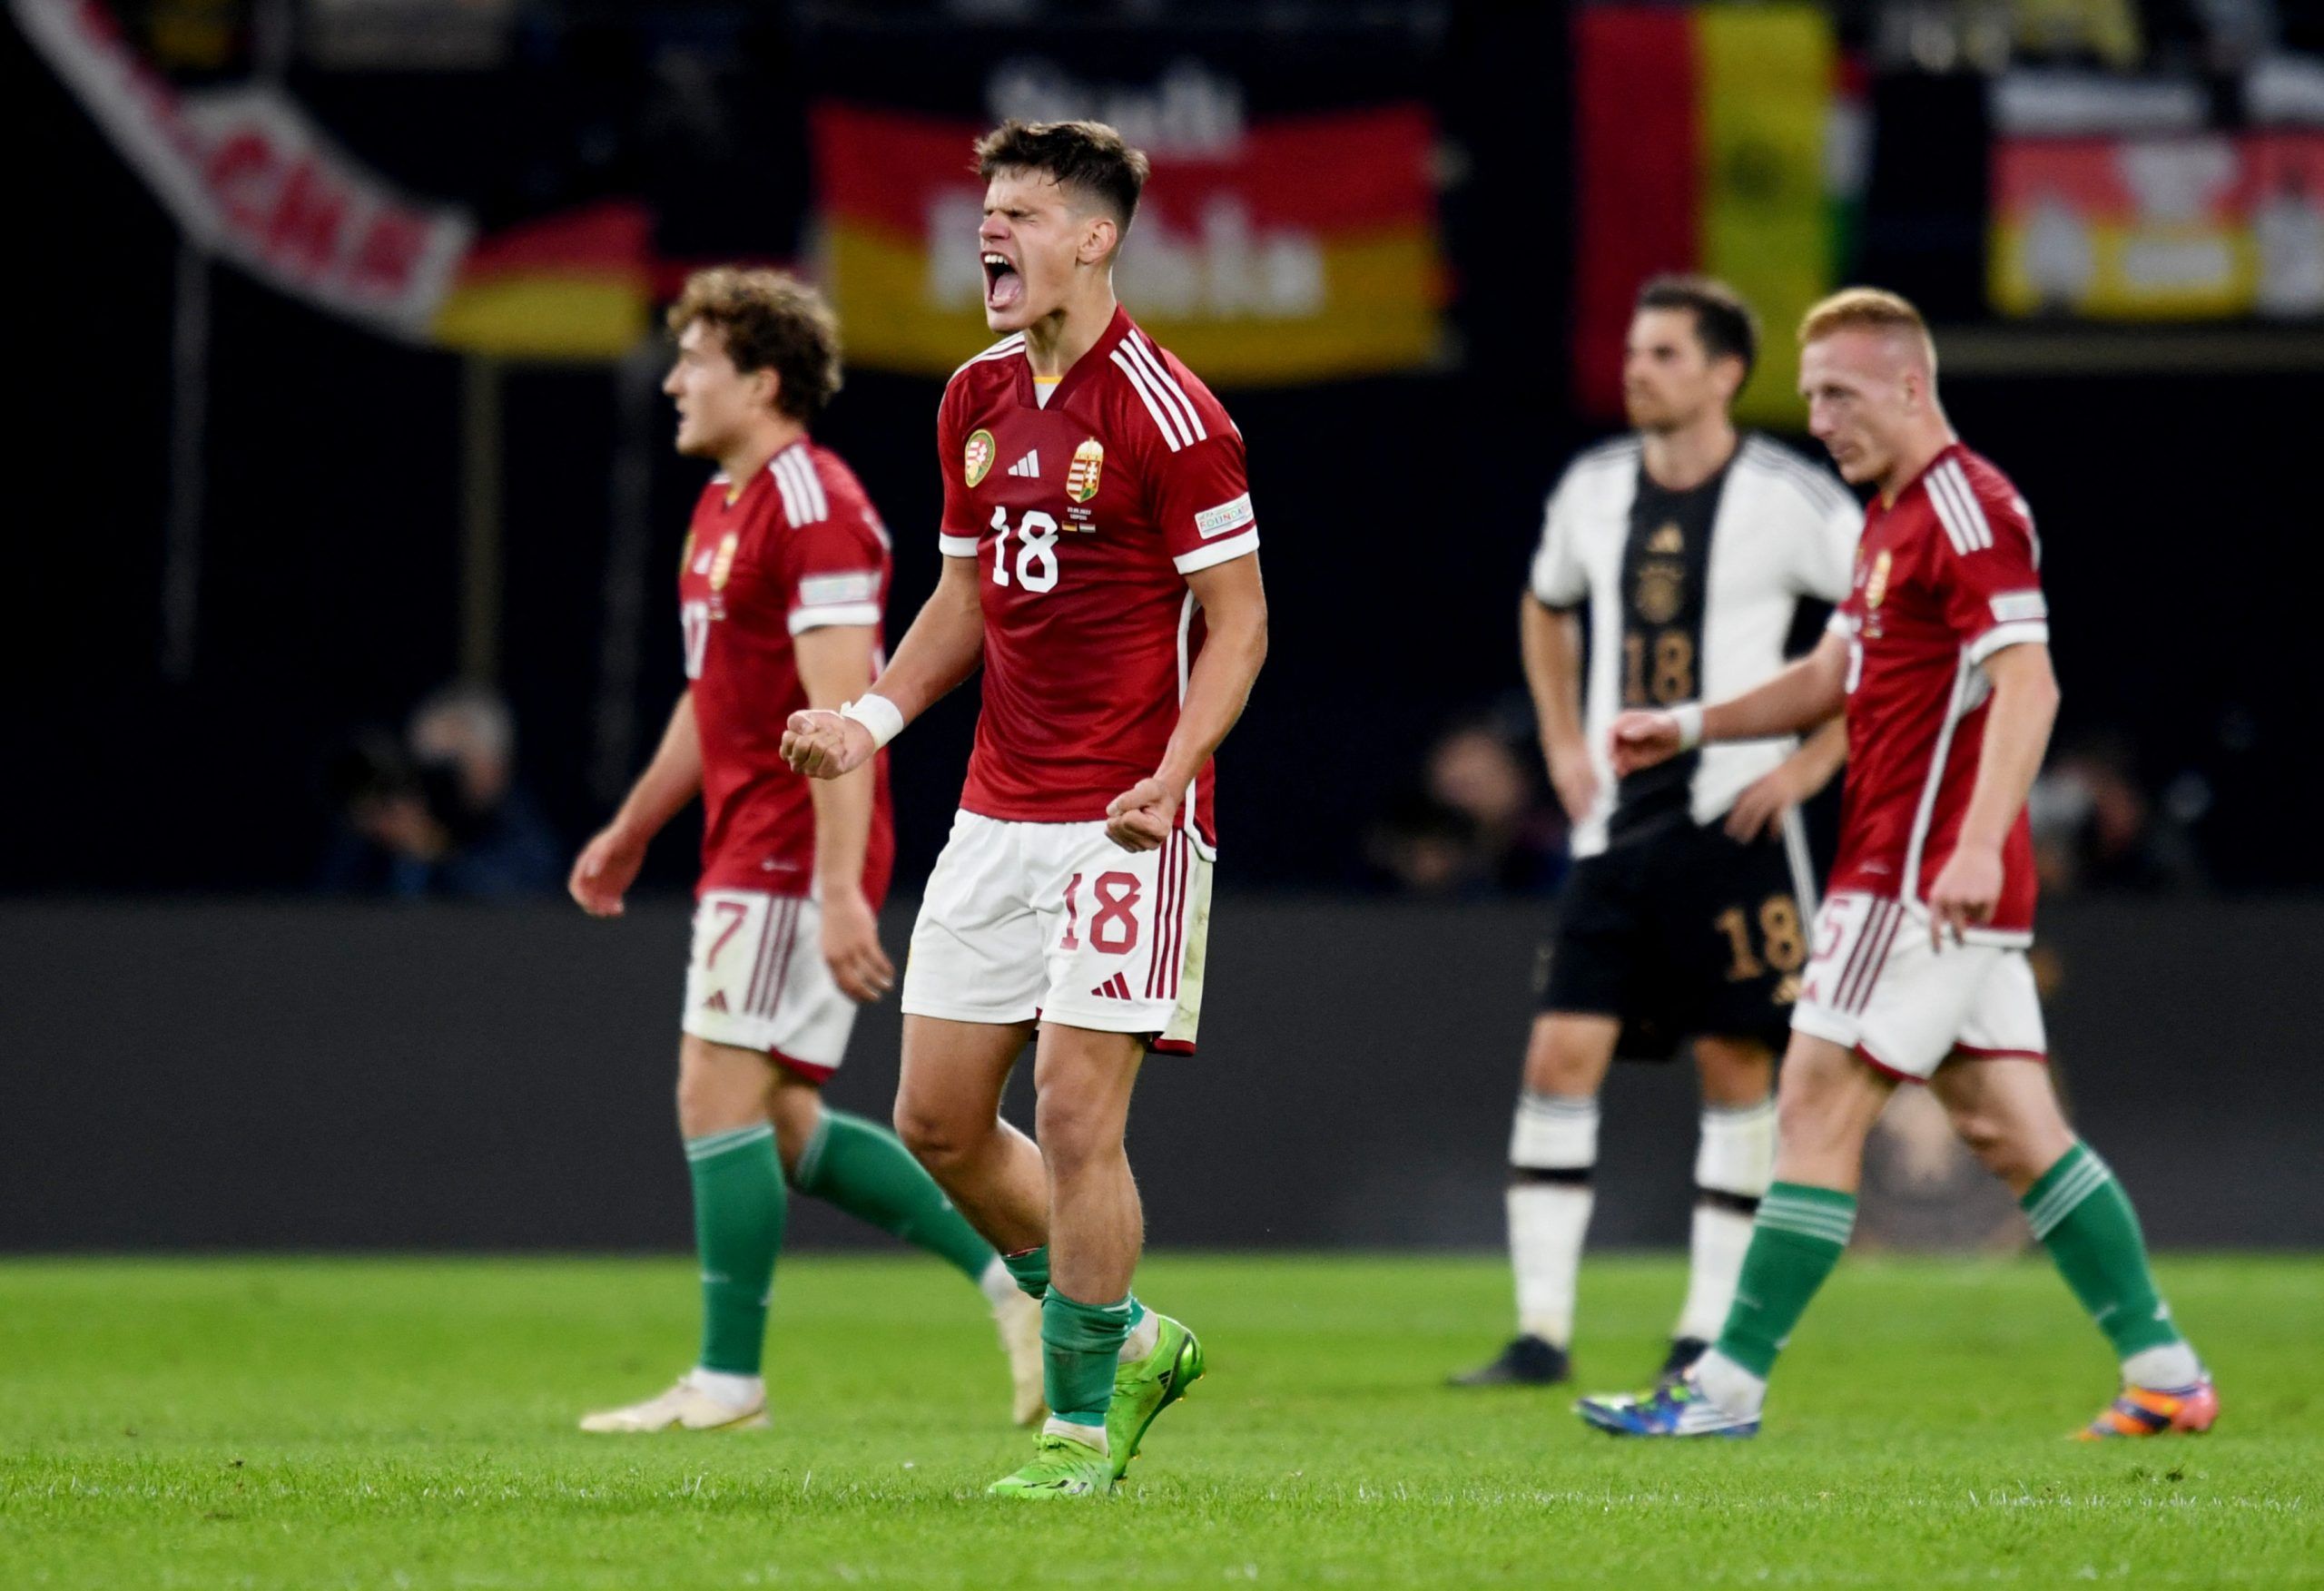 Soccer Football - UEFA Nations League - Group C - Germany v Hungary - Red Bull Arena, Leipzig, Germany - September 23, 2022 Hungary's Milos Kerkez celebrates after the match REUTERS/Annegret Hilse